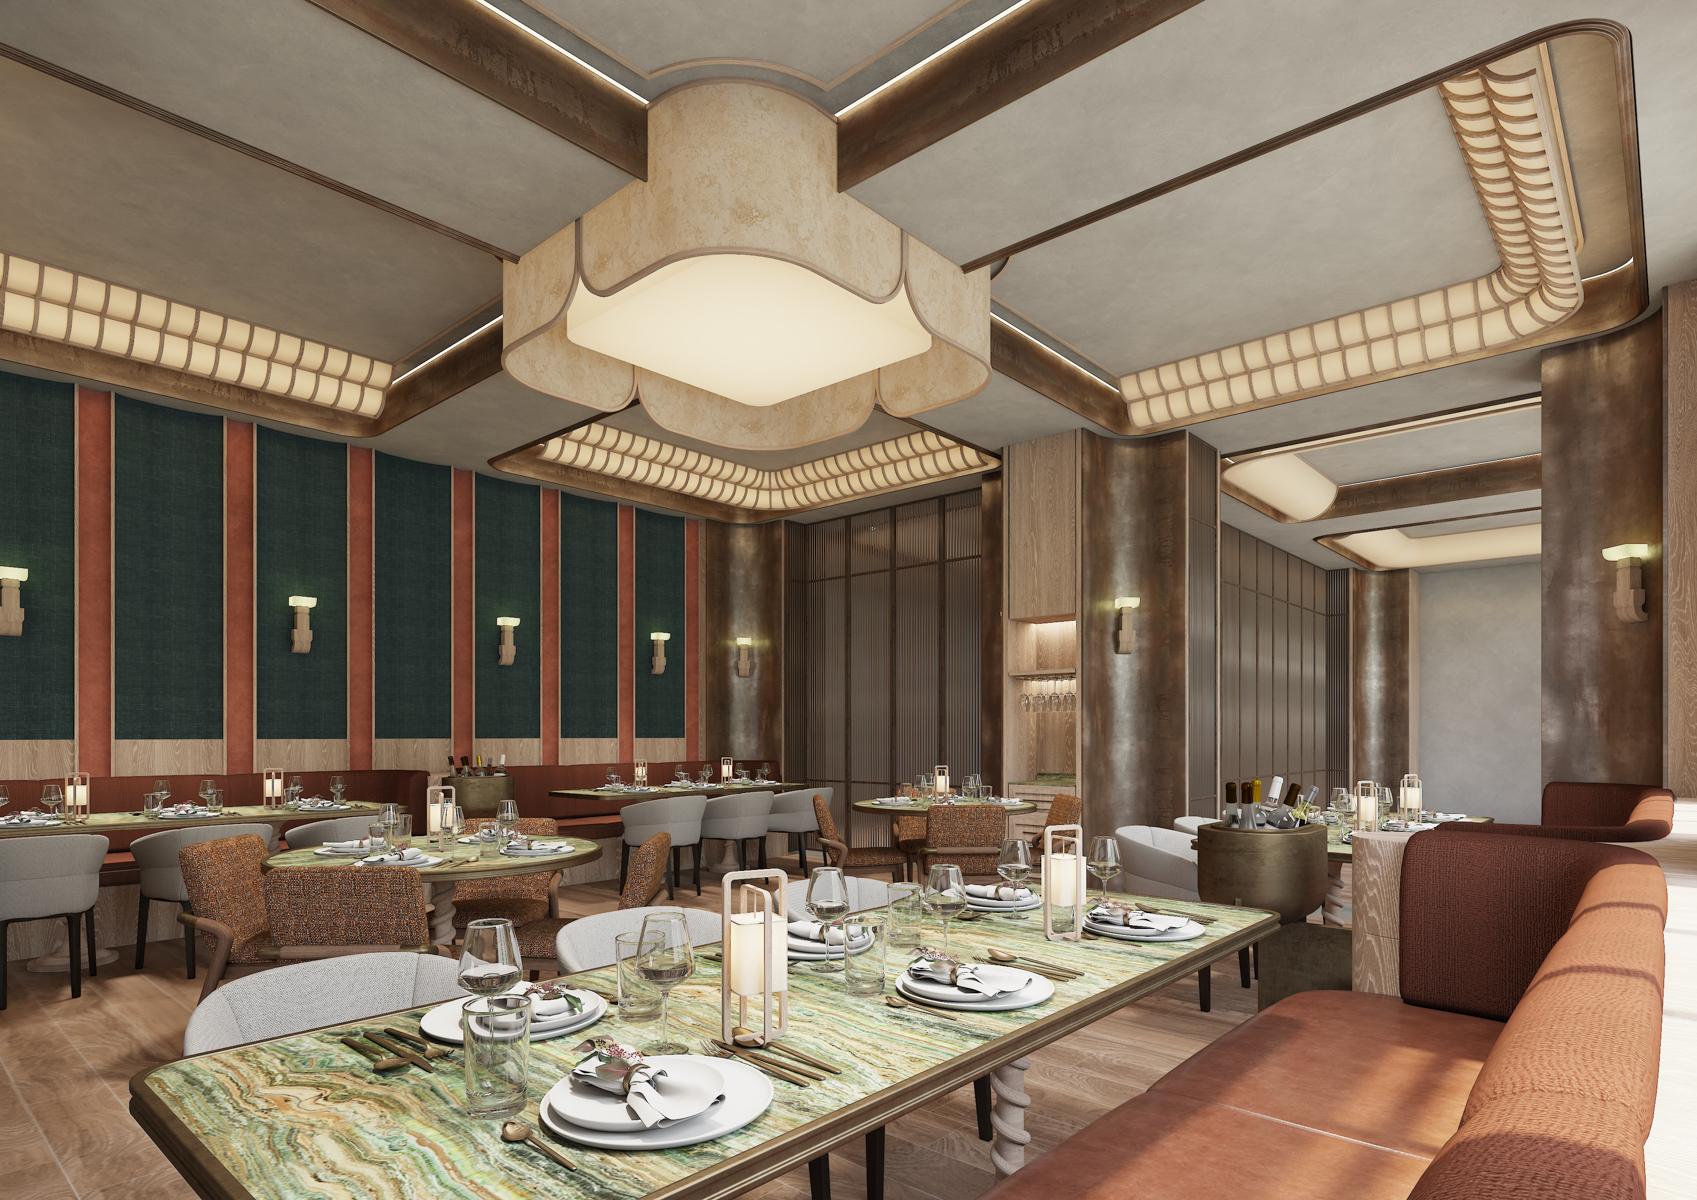 Club Bâtard: Private Members' Club Designed by Joyce Wang to Open this Summer in Pedder Building